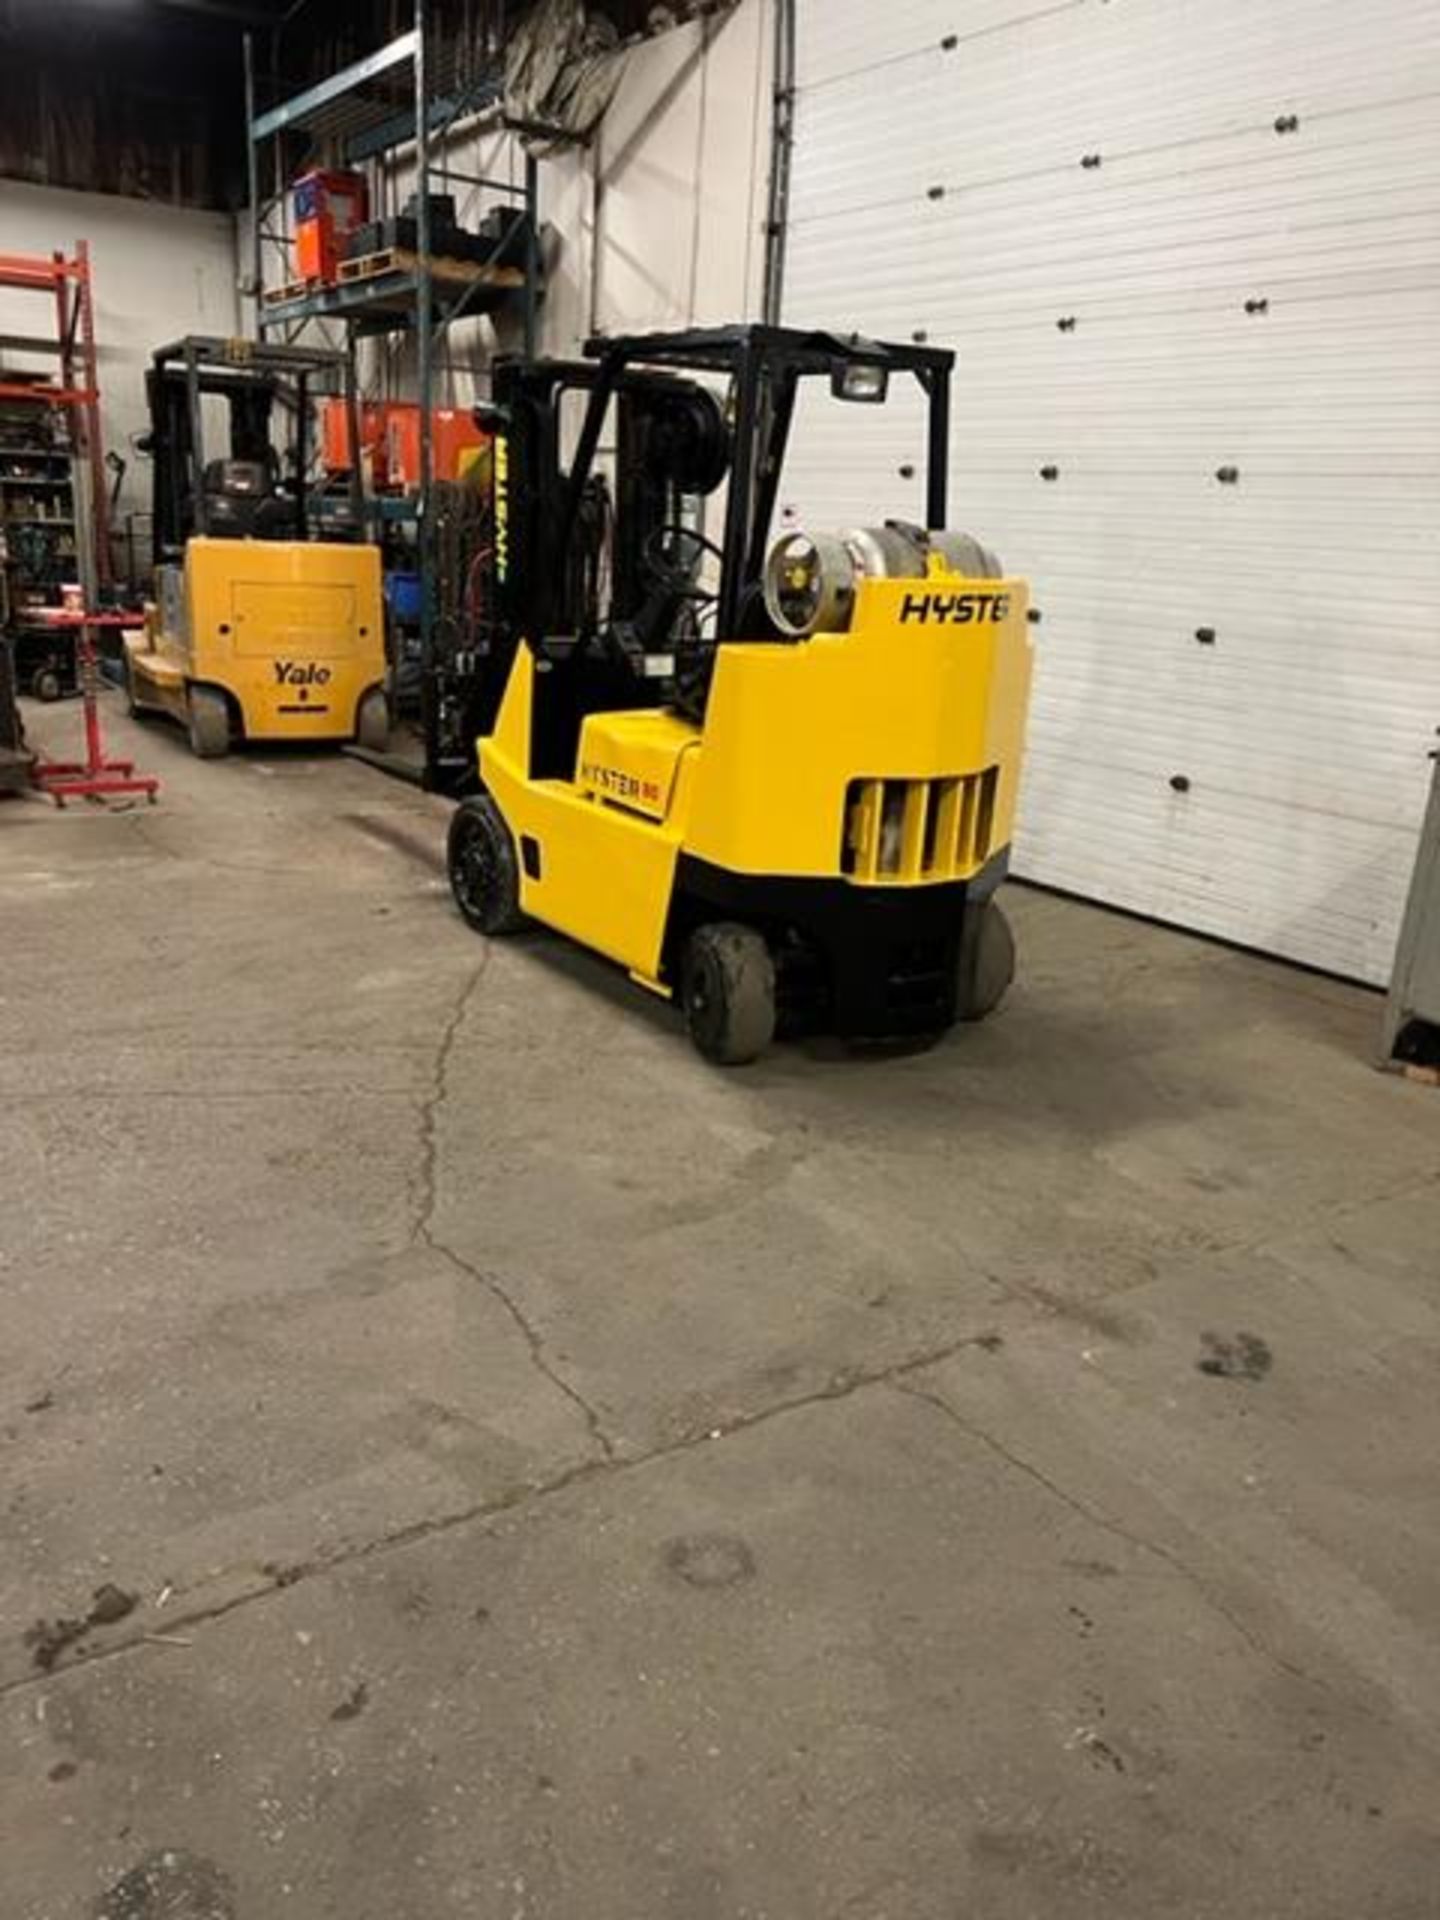 FREE CUSTOMS - NICE Hyster model 80 - 8,000lbs Capacity Forklift LPG (propane) with 60" forks with - Image 3 of 3